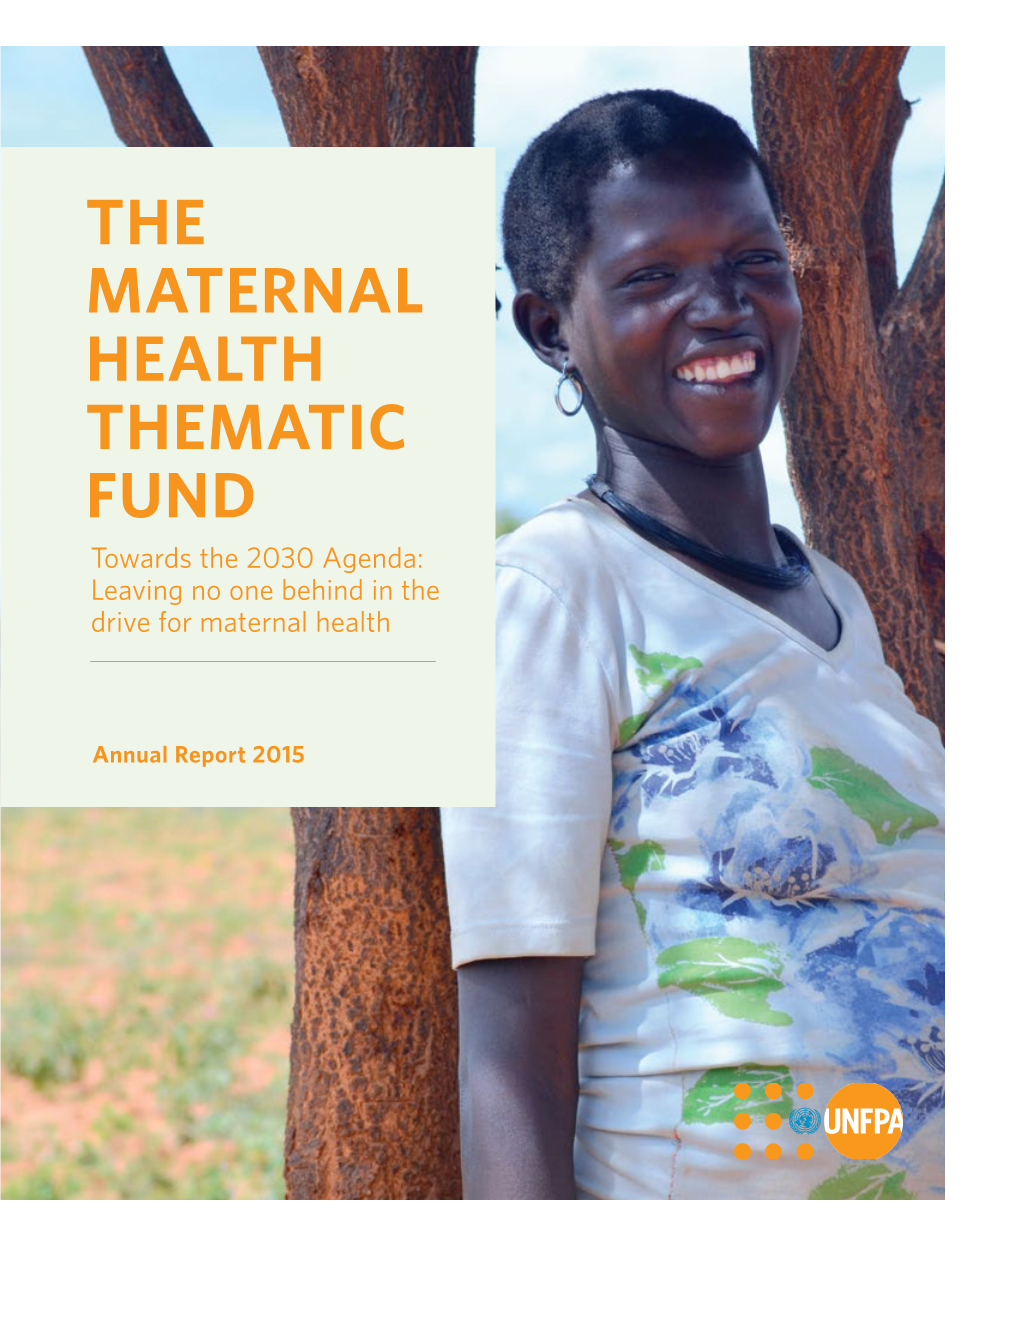 THE MATERNAL HEALTH THEMATIC FUND Towards the 2030 Agenda: Leaving No One Behind in the Drive for Maternal Health